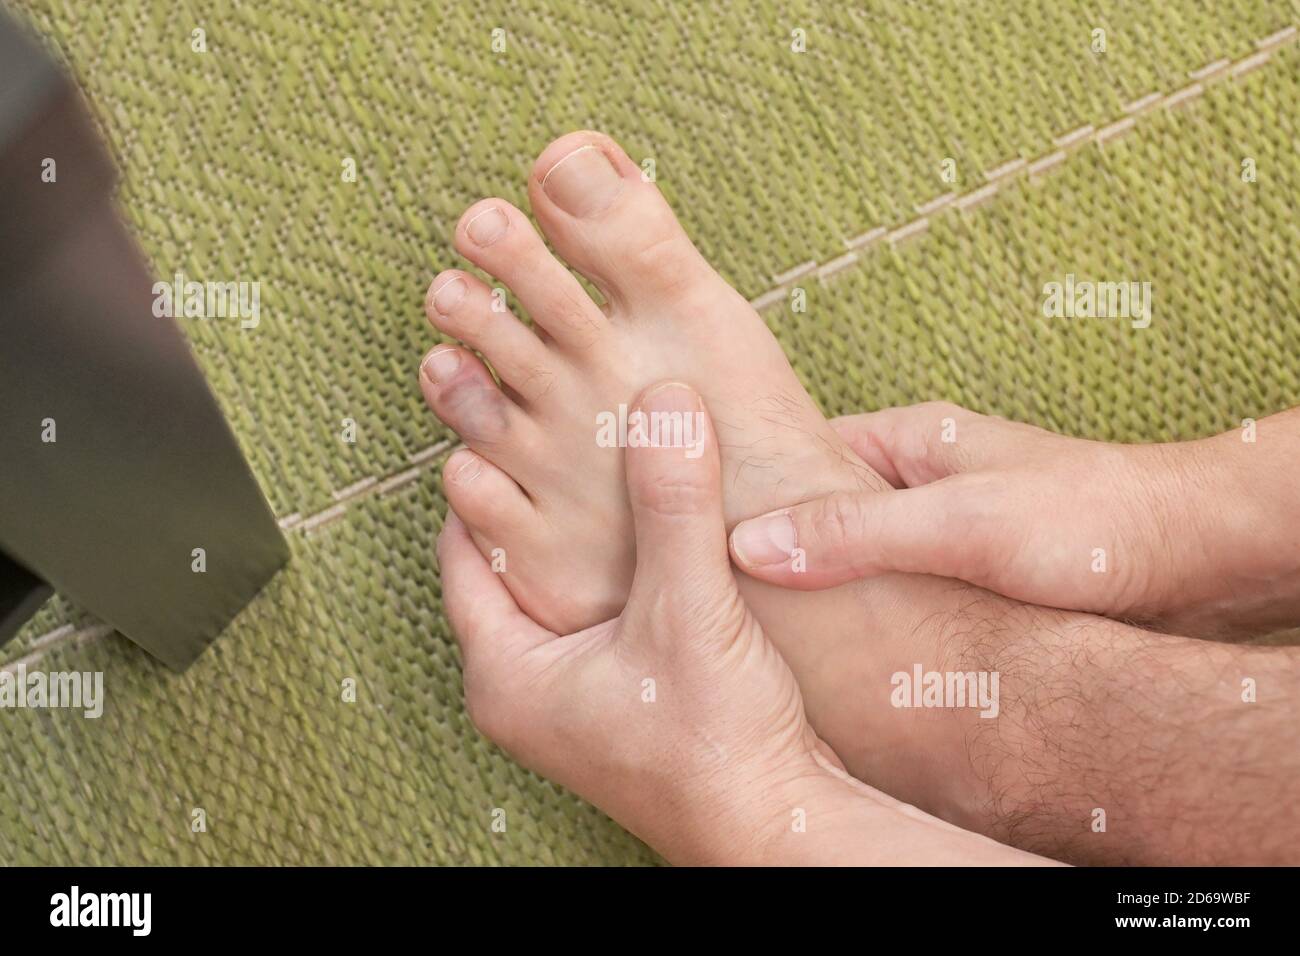 Finger man toe injured after kicking a table foot. Stock Photo